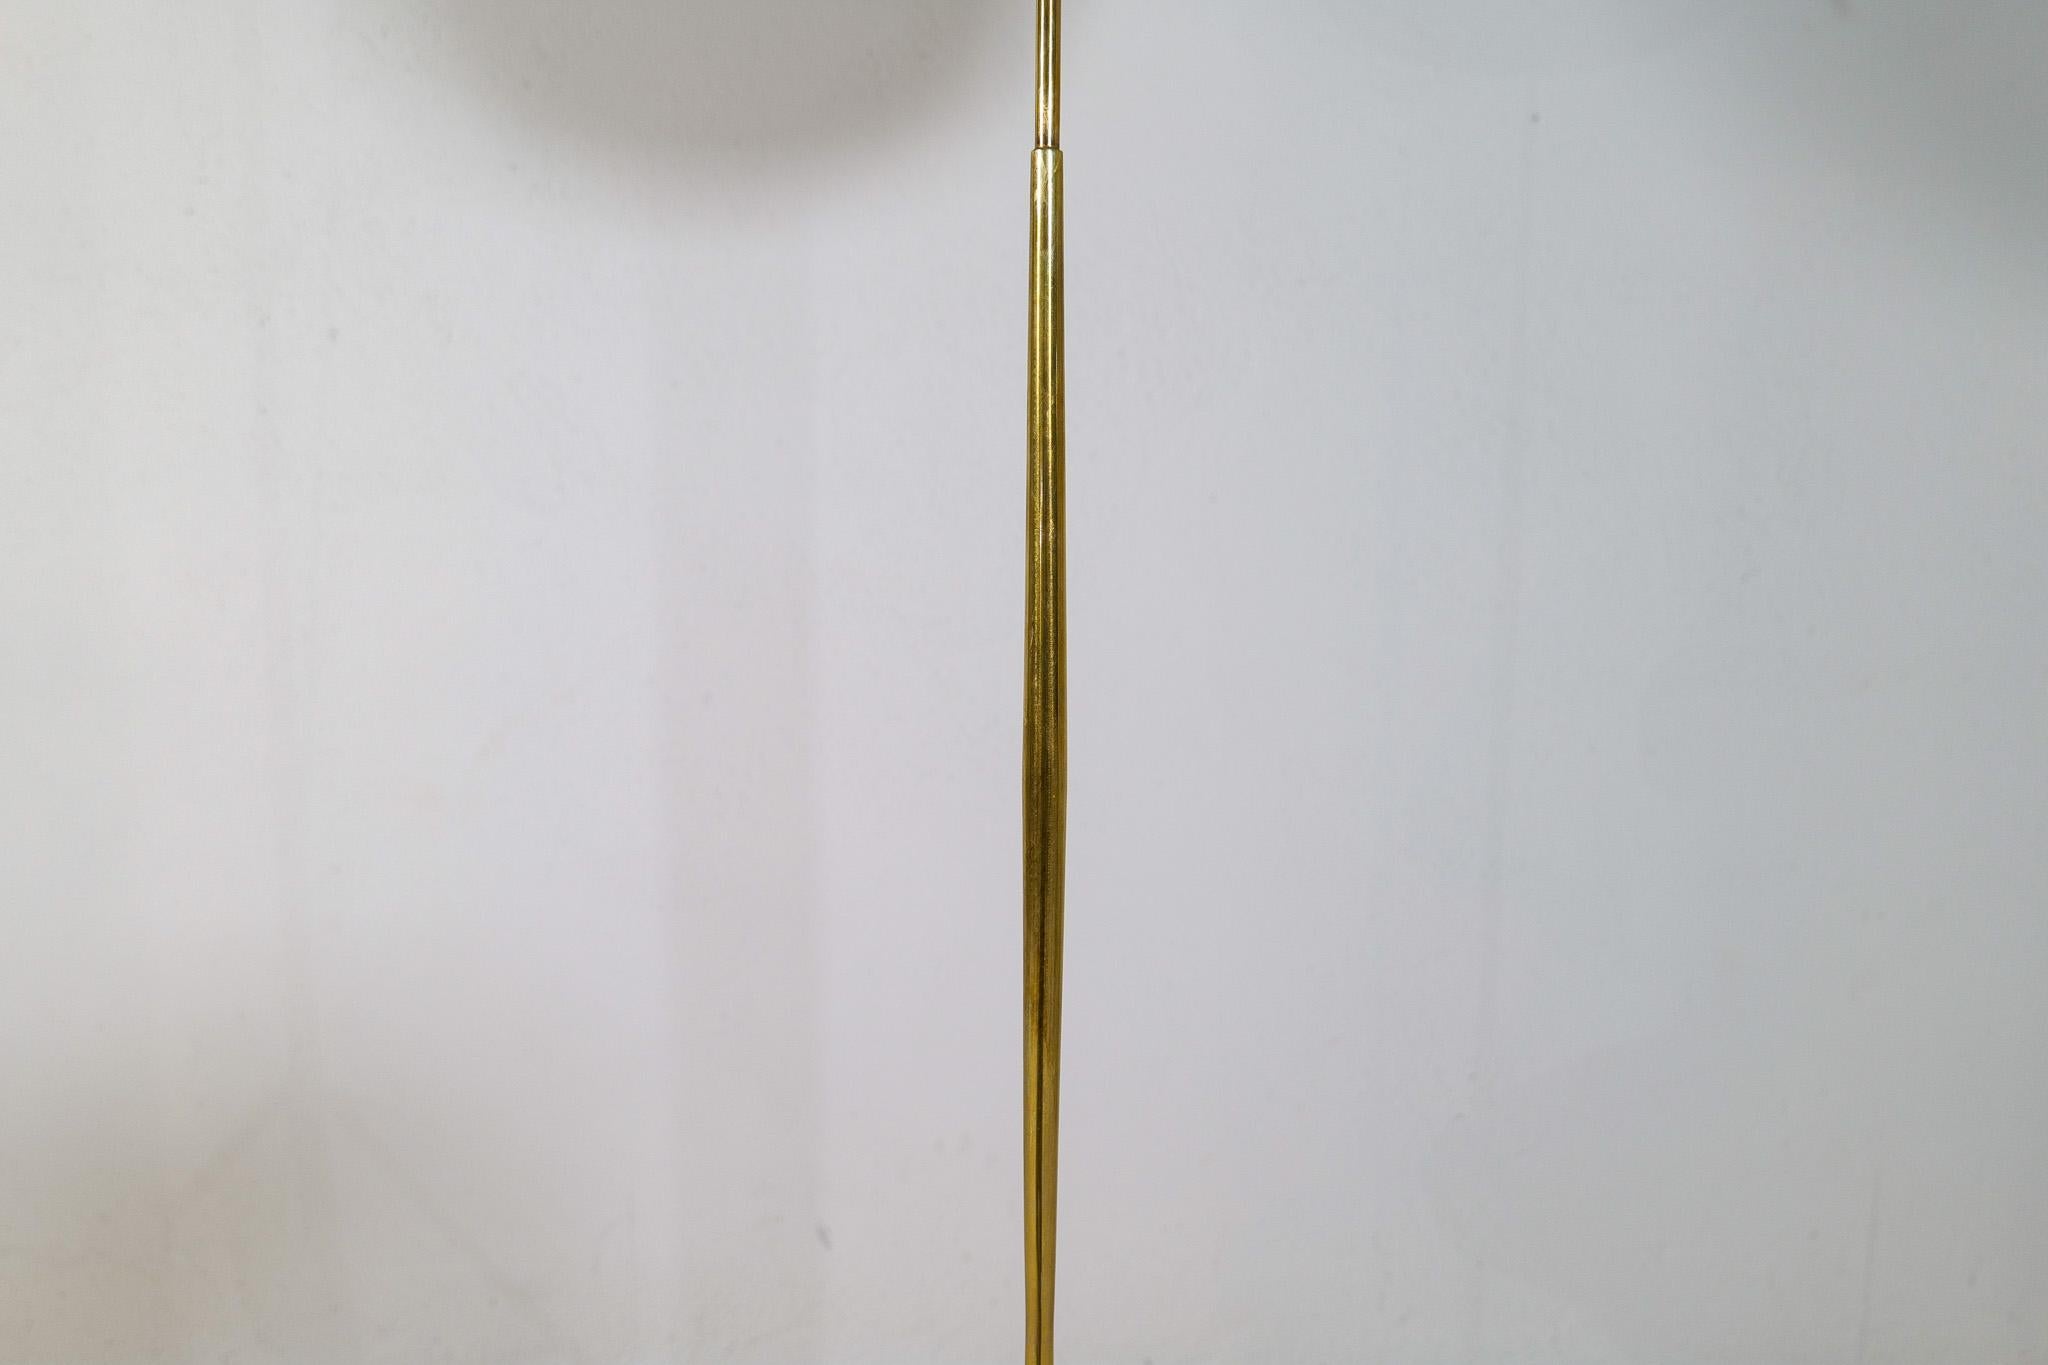 Midcentury Modern ASEA Brass Floor Lamp with Round Cotton Shade, Sweden, 1960s For Sale 4